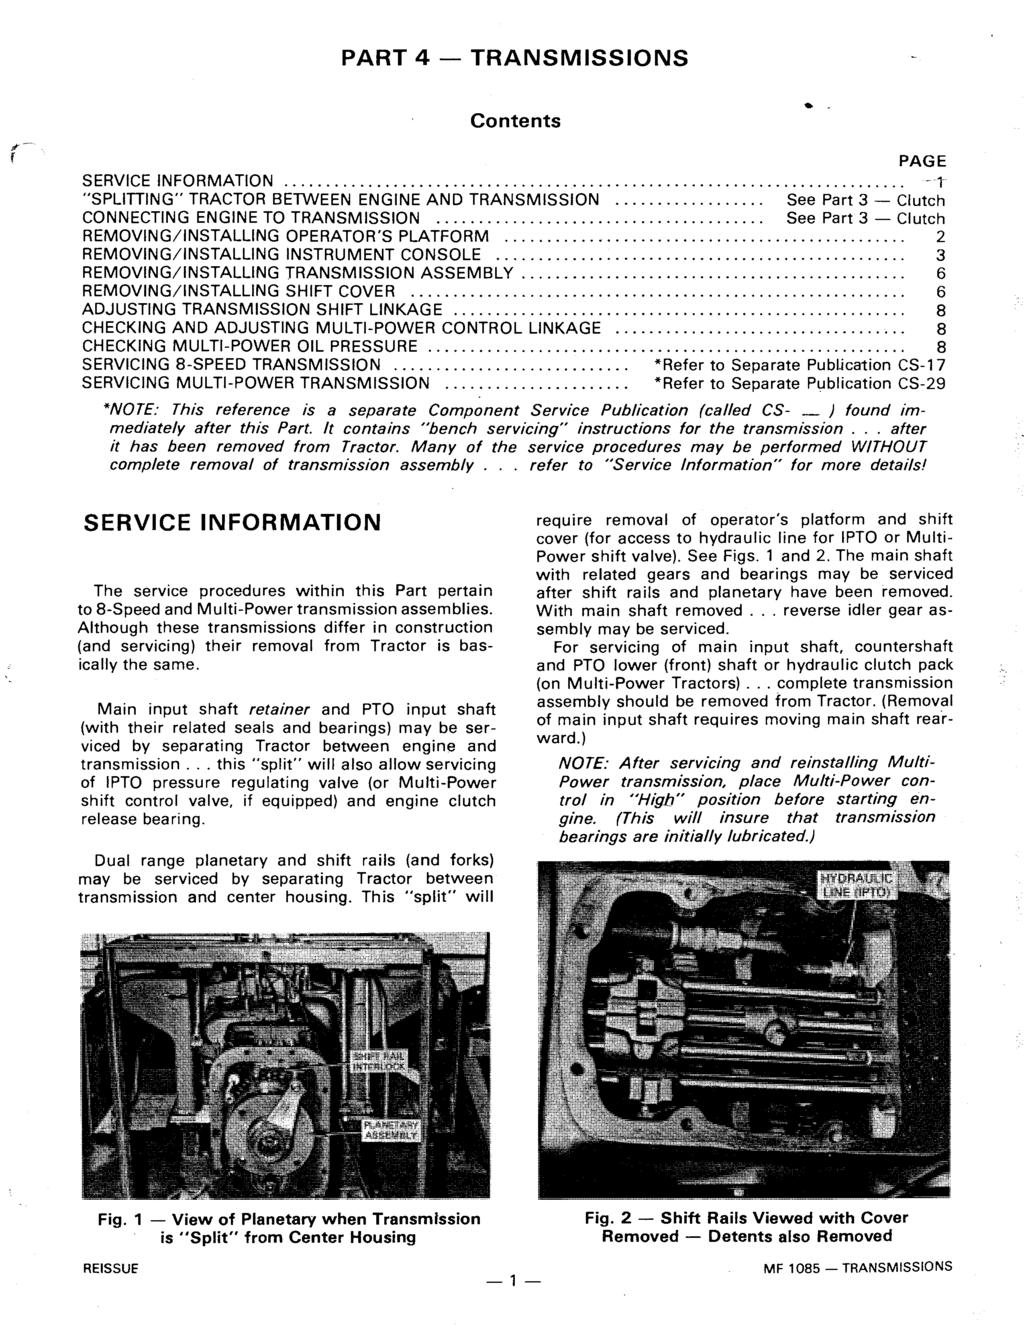 PART 4 - TRANSMISSIONS Contents. - SERVICE INFORMATION...,... "--l "SPLITIING" TRACTOR BETWEEN ENGINE AND TRANSMISSION... See Part 3 - Clutch CONNECTING ENGINE TO TRANSMISSION.